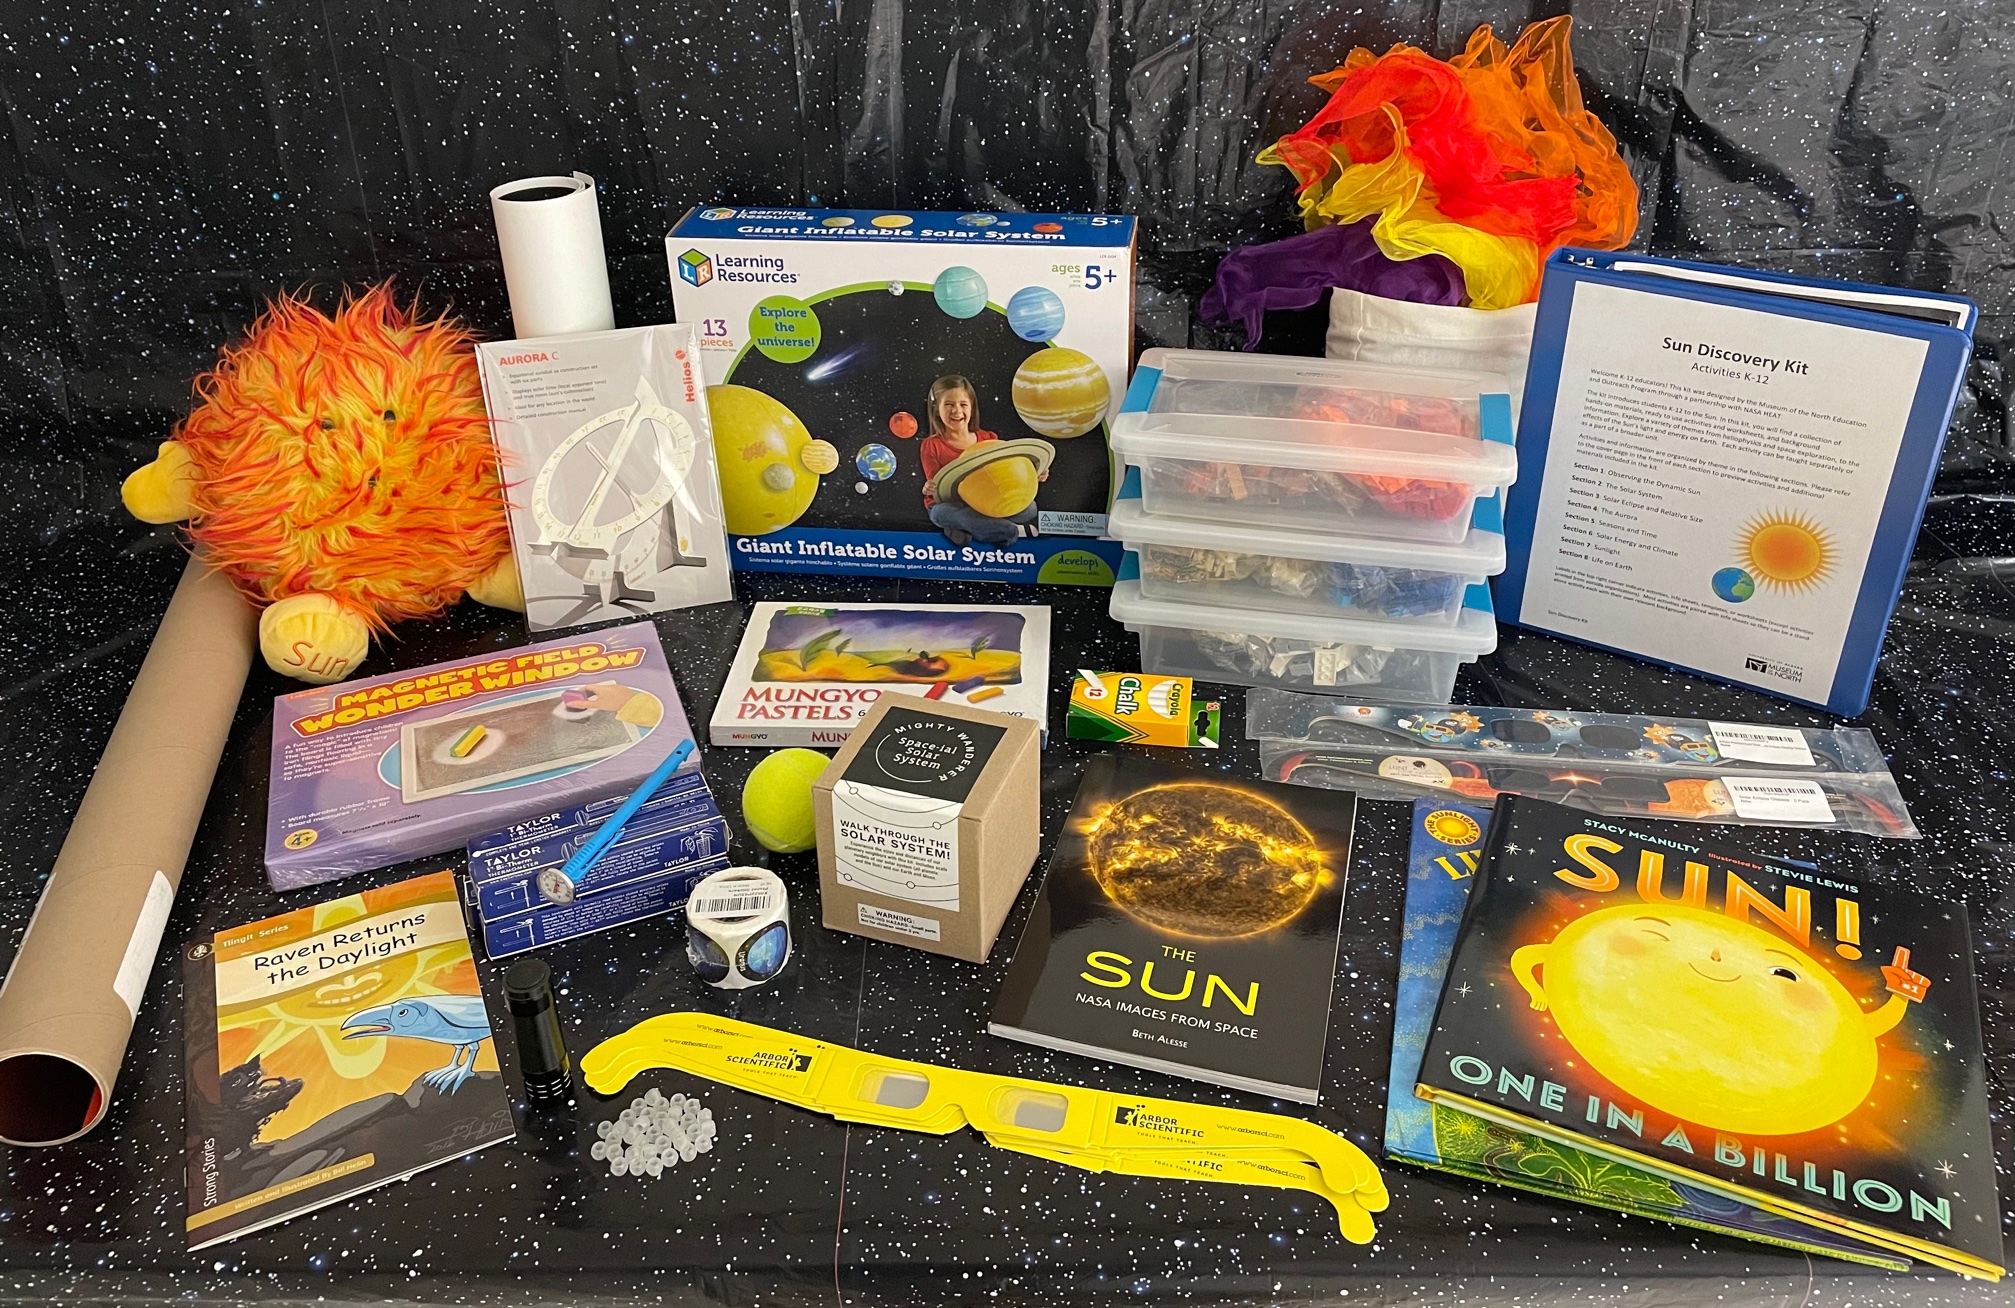 Sun discovery kit contents on a starry background.